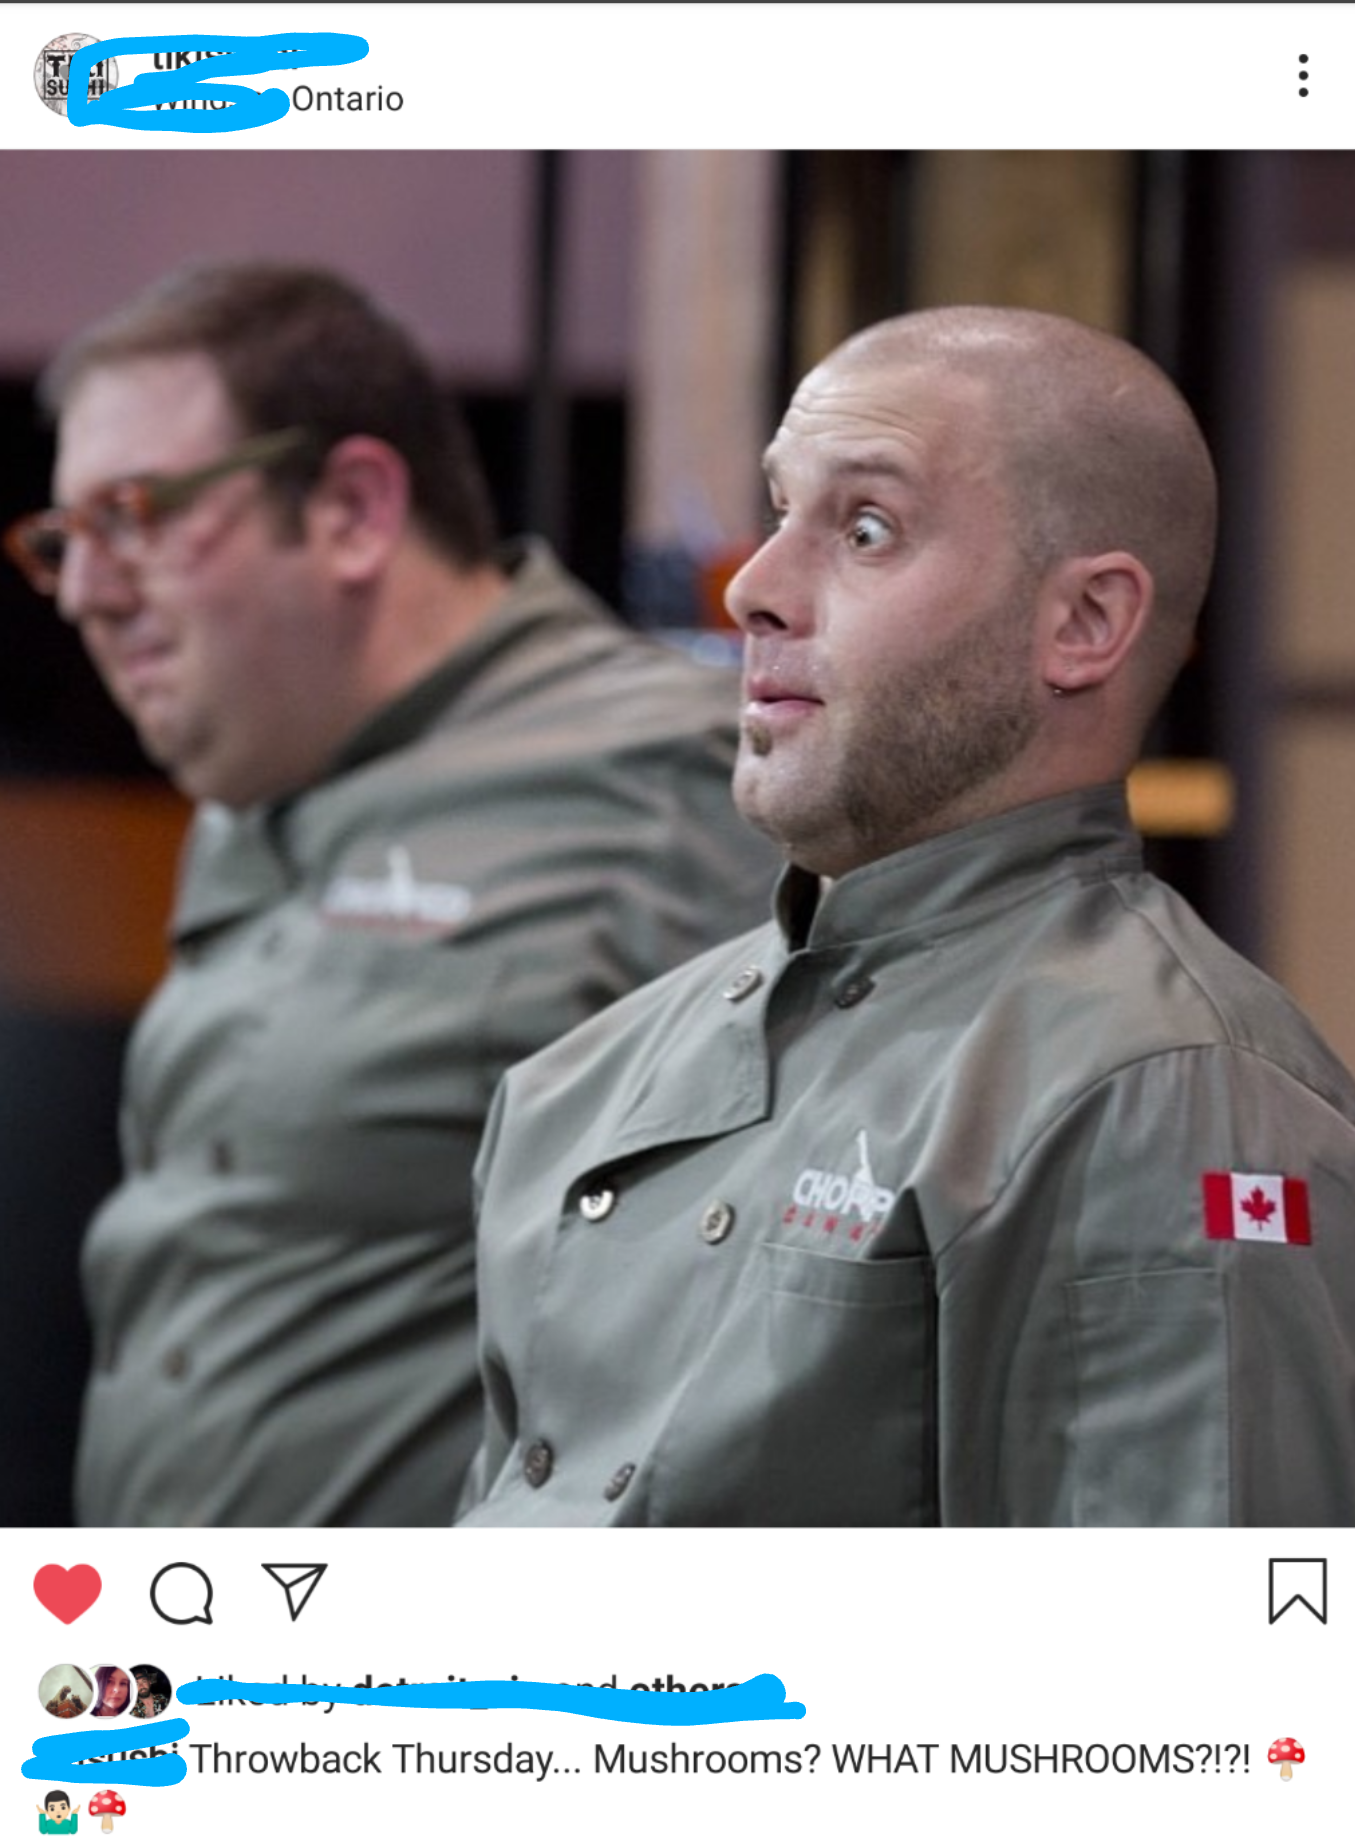 My friend participated in Chopped Canada. This is the moment be realized that he forgot an ingredient.